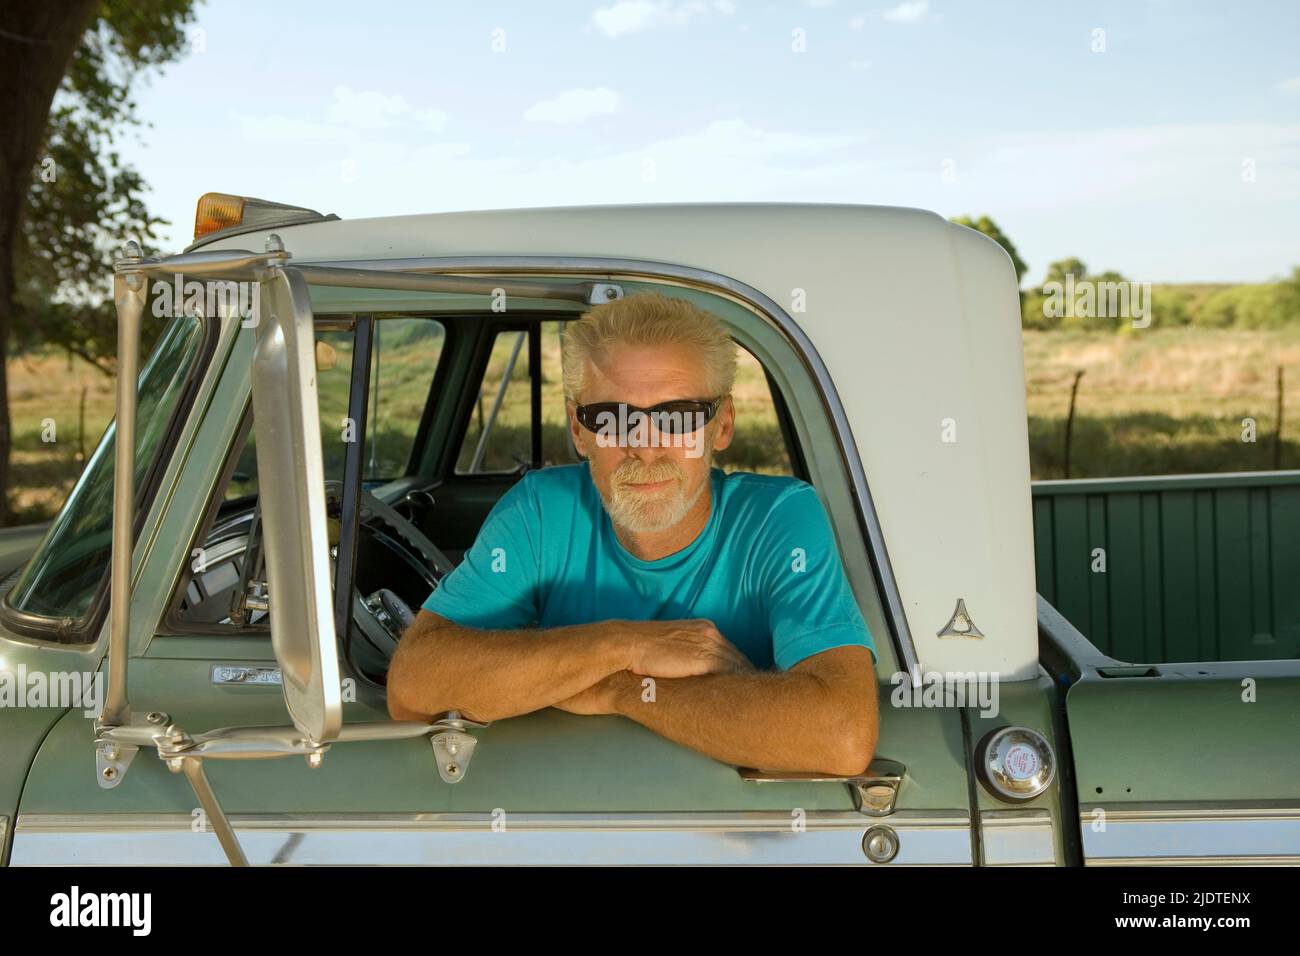 Blonde man ( aged 40-60) with beard leaning out the window of a vintage pick up truck parked in a rural area. Stock Photo